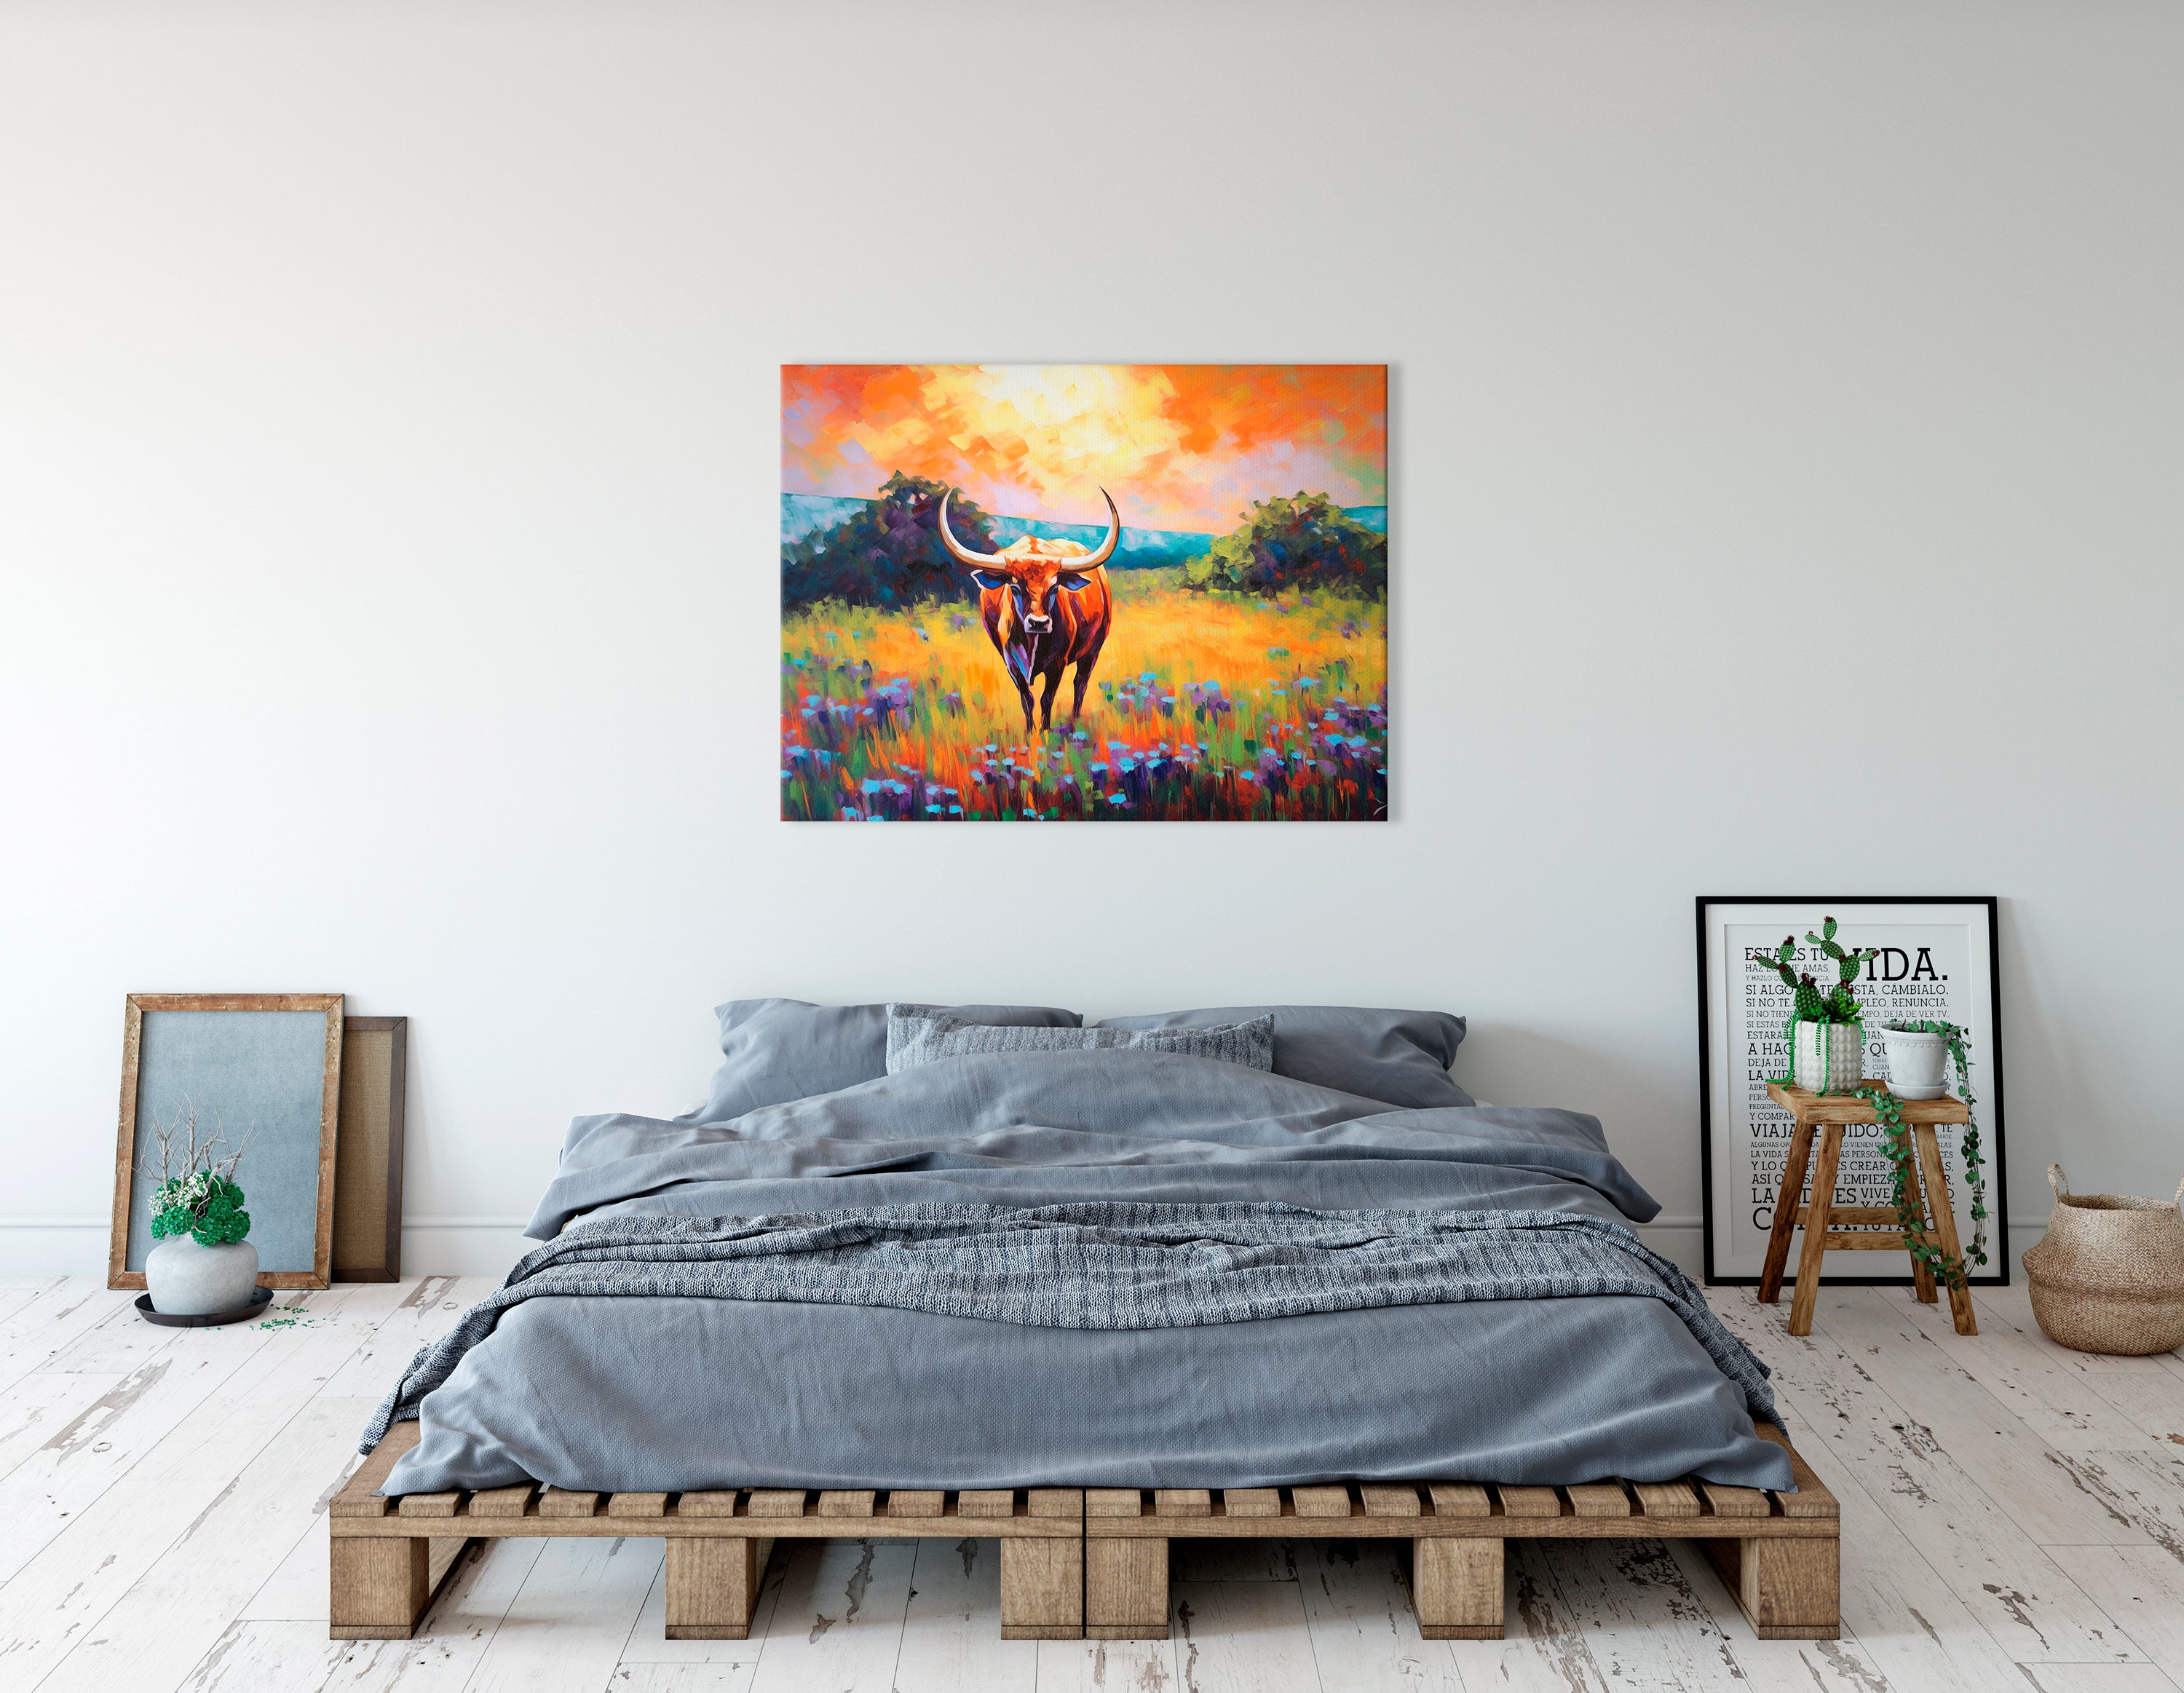 Texas Longhorn Bull in the Blooming Field - Canvas Print - Artoholica Ready to Hang Canvas Print